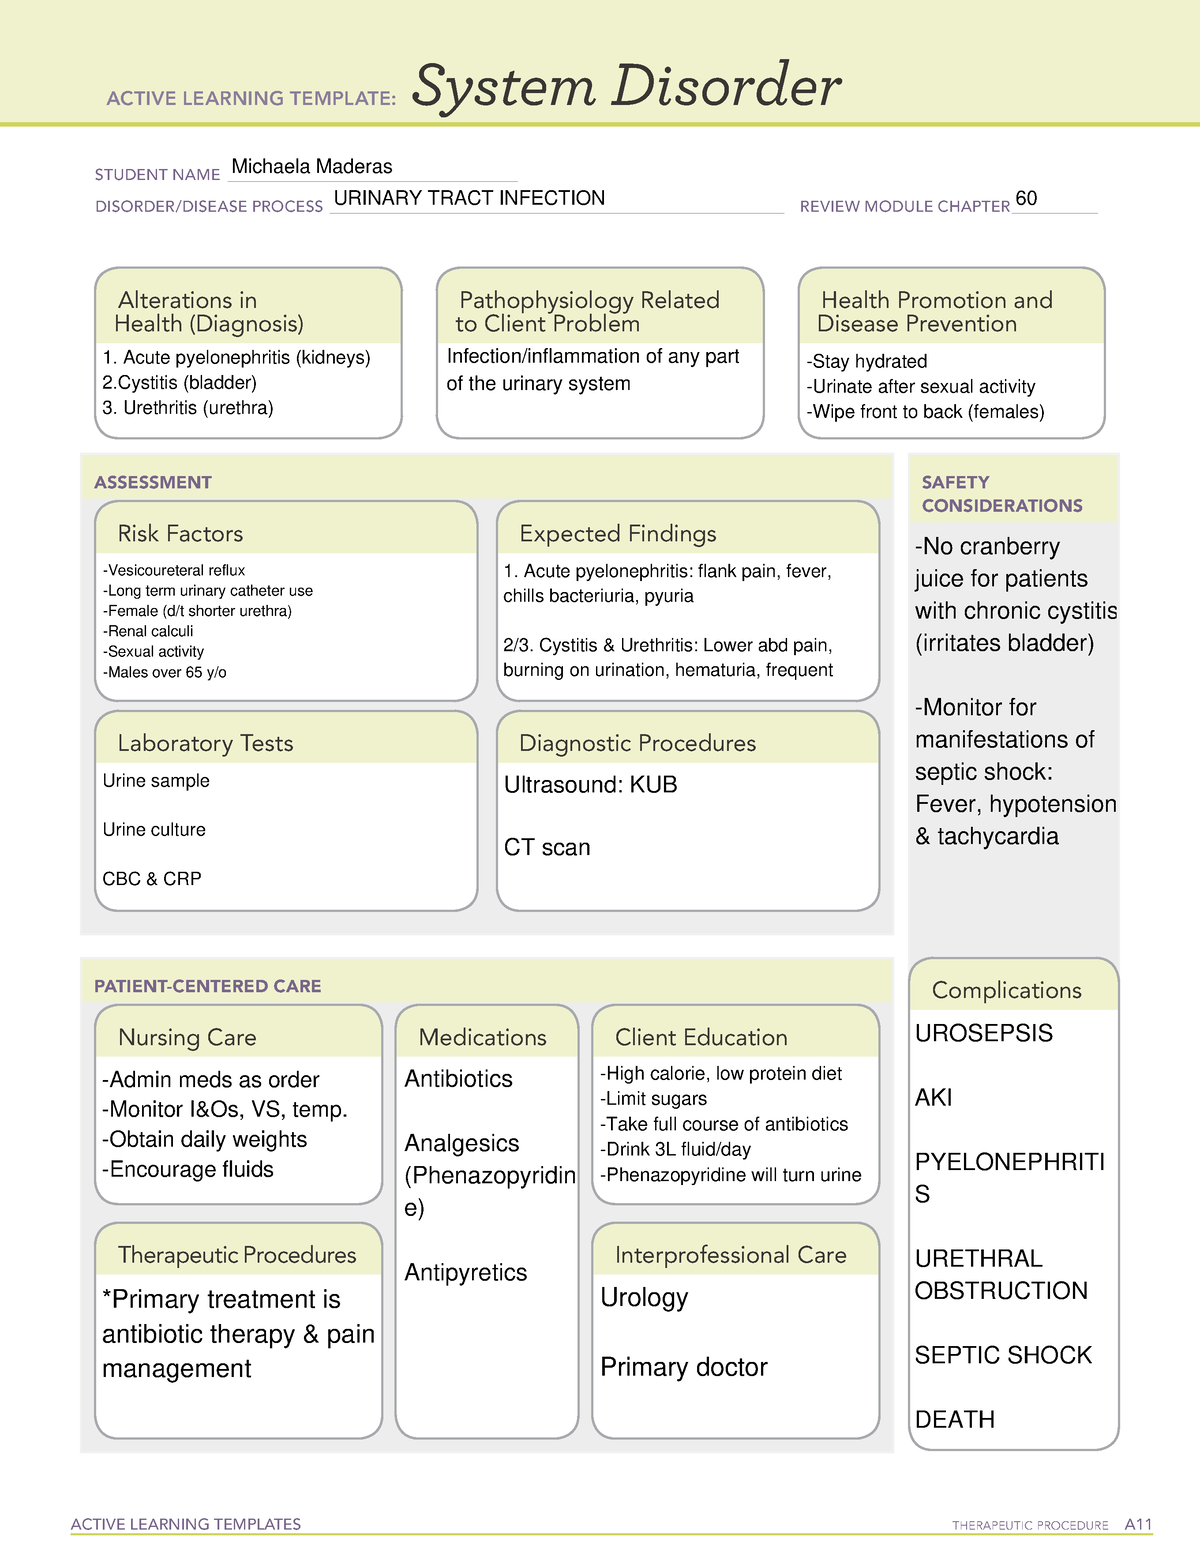 Urinary Tract Infection System Disorder ACTIVE LEARNING TEMPLATES